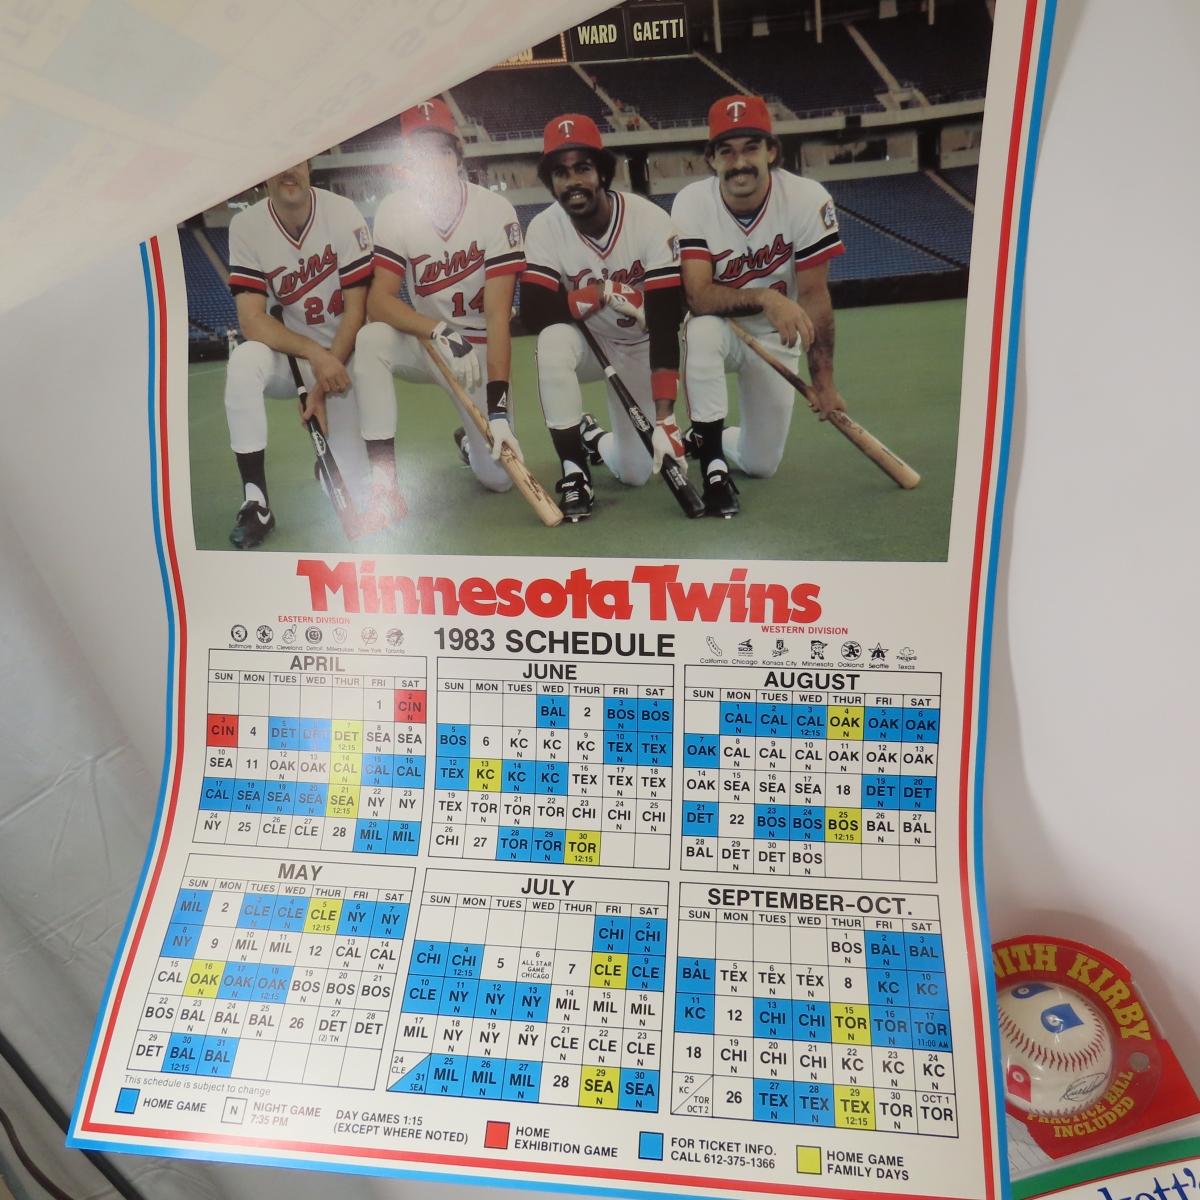 MN Twins Collectibles- Bobblehead, Programs